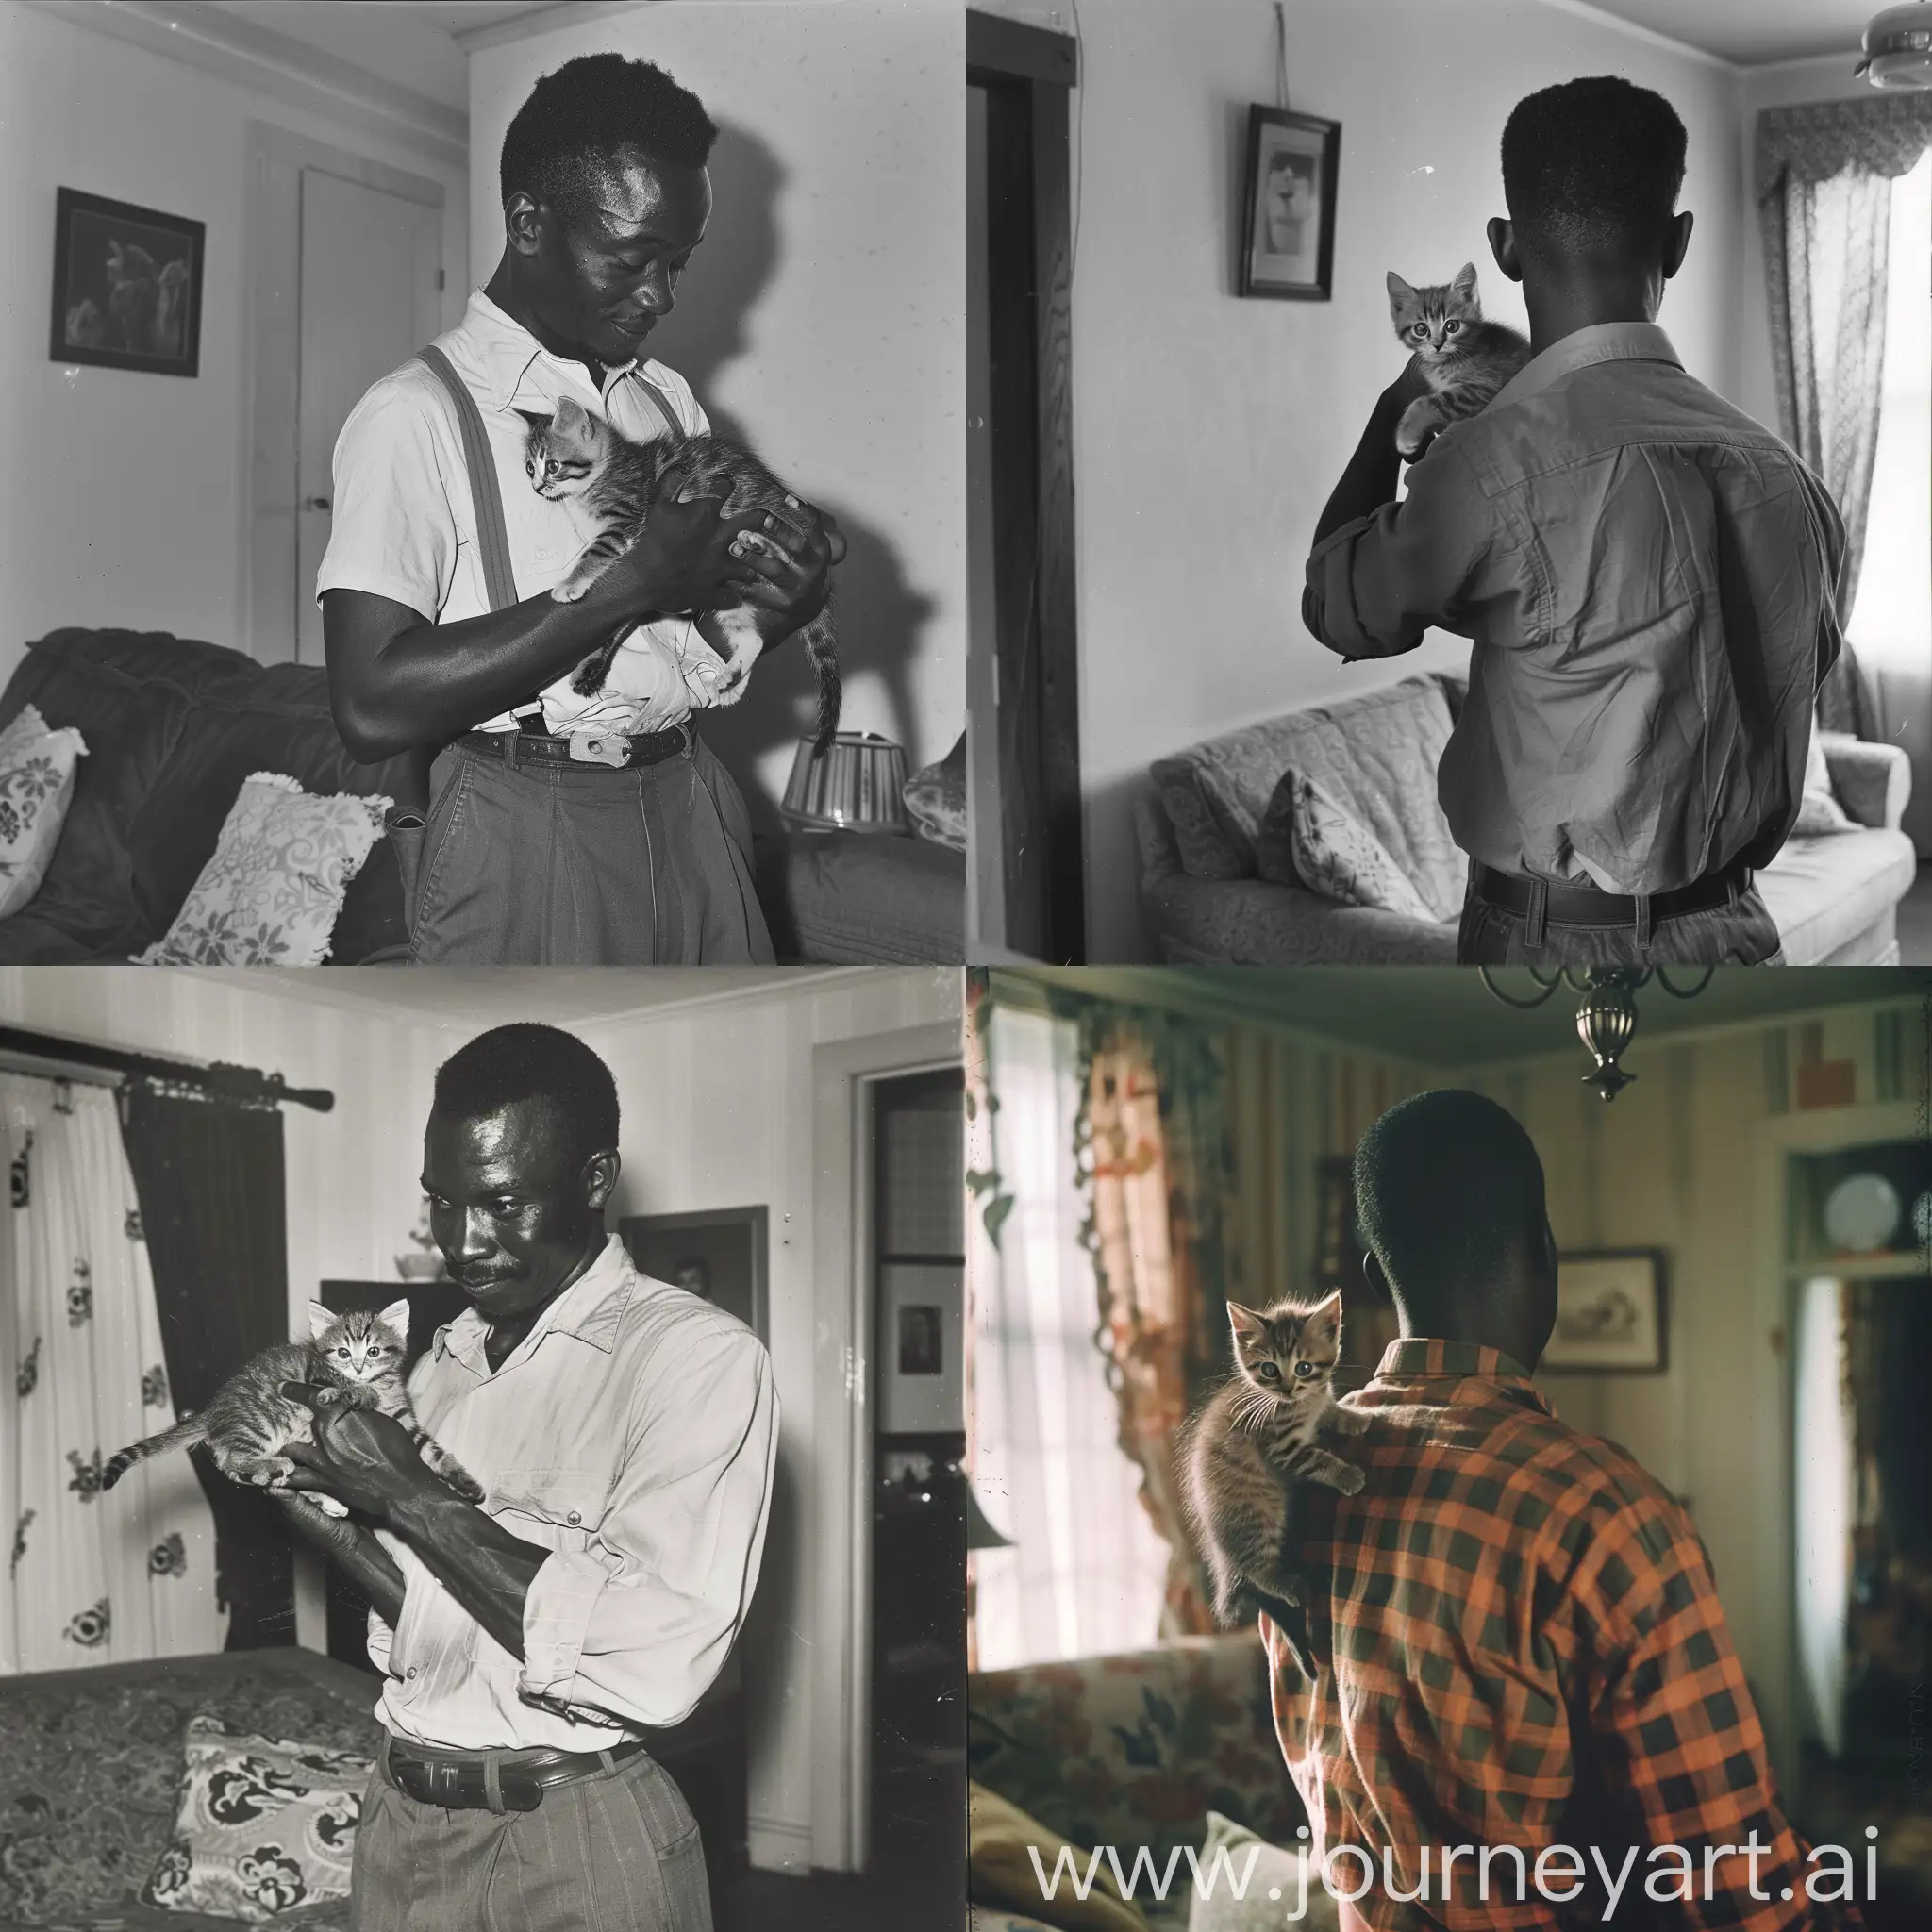 A black man carrying a kitten in the living room, 1950s photograph